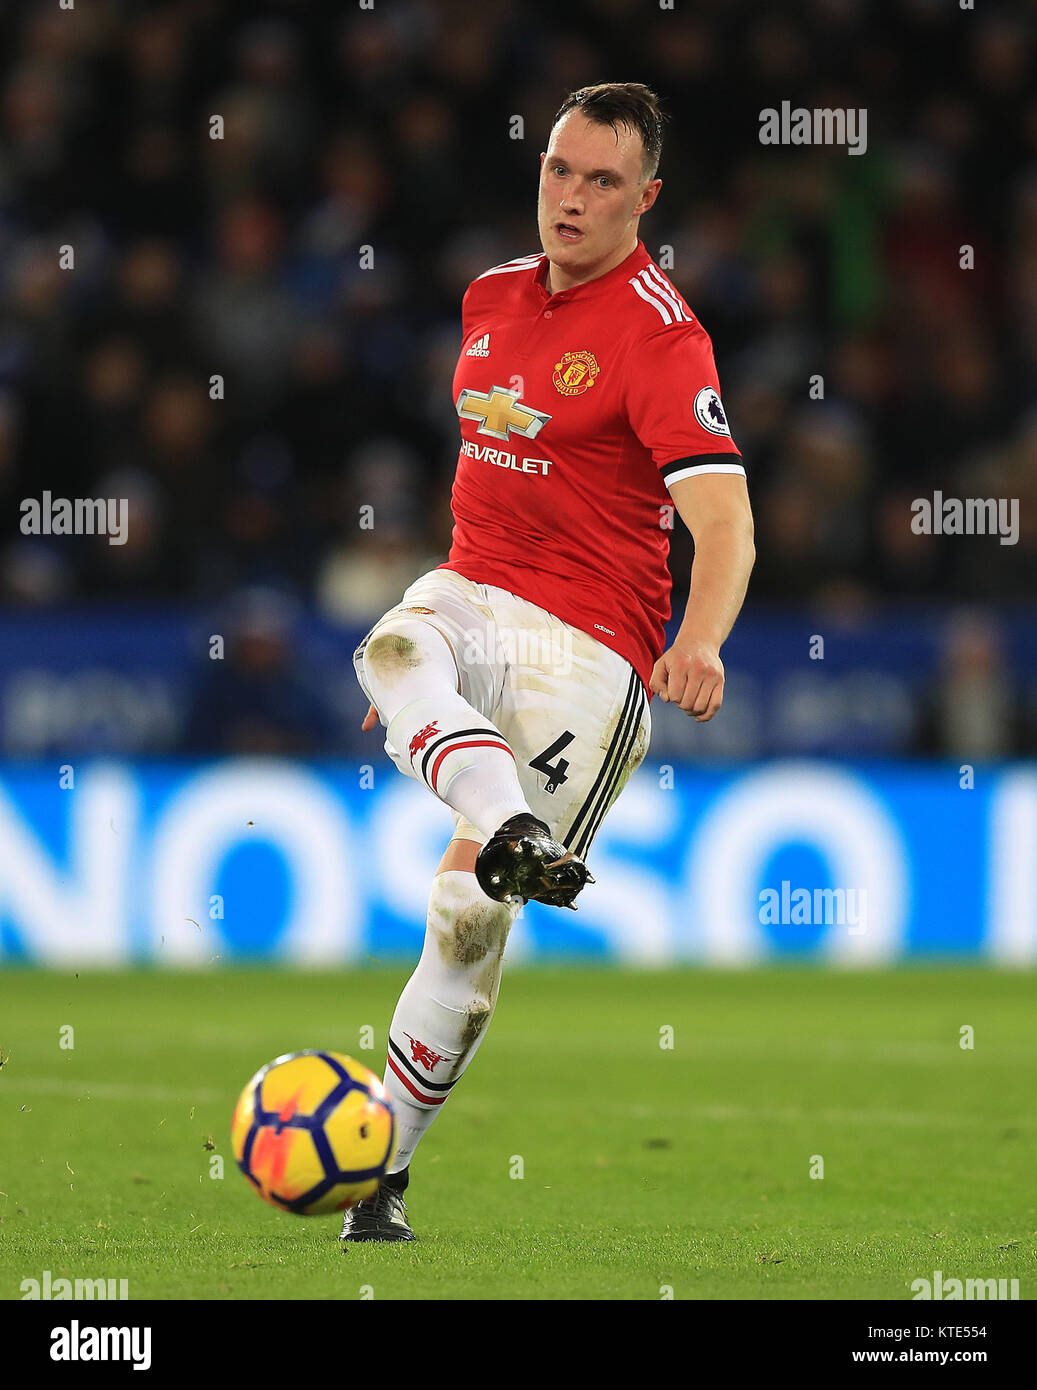 Manchester United's Phil Jones during the Premier League match at the King Power Stadium, Leicester. PRESS ASSOCIATION Photo. Picture date: Saturday December 23, 2017. See PA story SOCCER Leicester. Photo credit should read: Mike Egerton/PA Wire. RESTRICTIONS: EDITORIAL USE ONLY No use with unauthorised audio, video, data, fixture lists, club/league logos or 'live' services. Online in-match use limited to 75 images, no video emulation. No use in betting, games or single club/league/player publications. Stock Photo